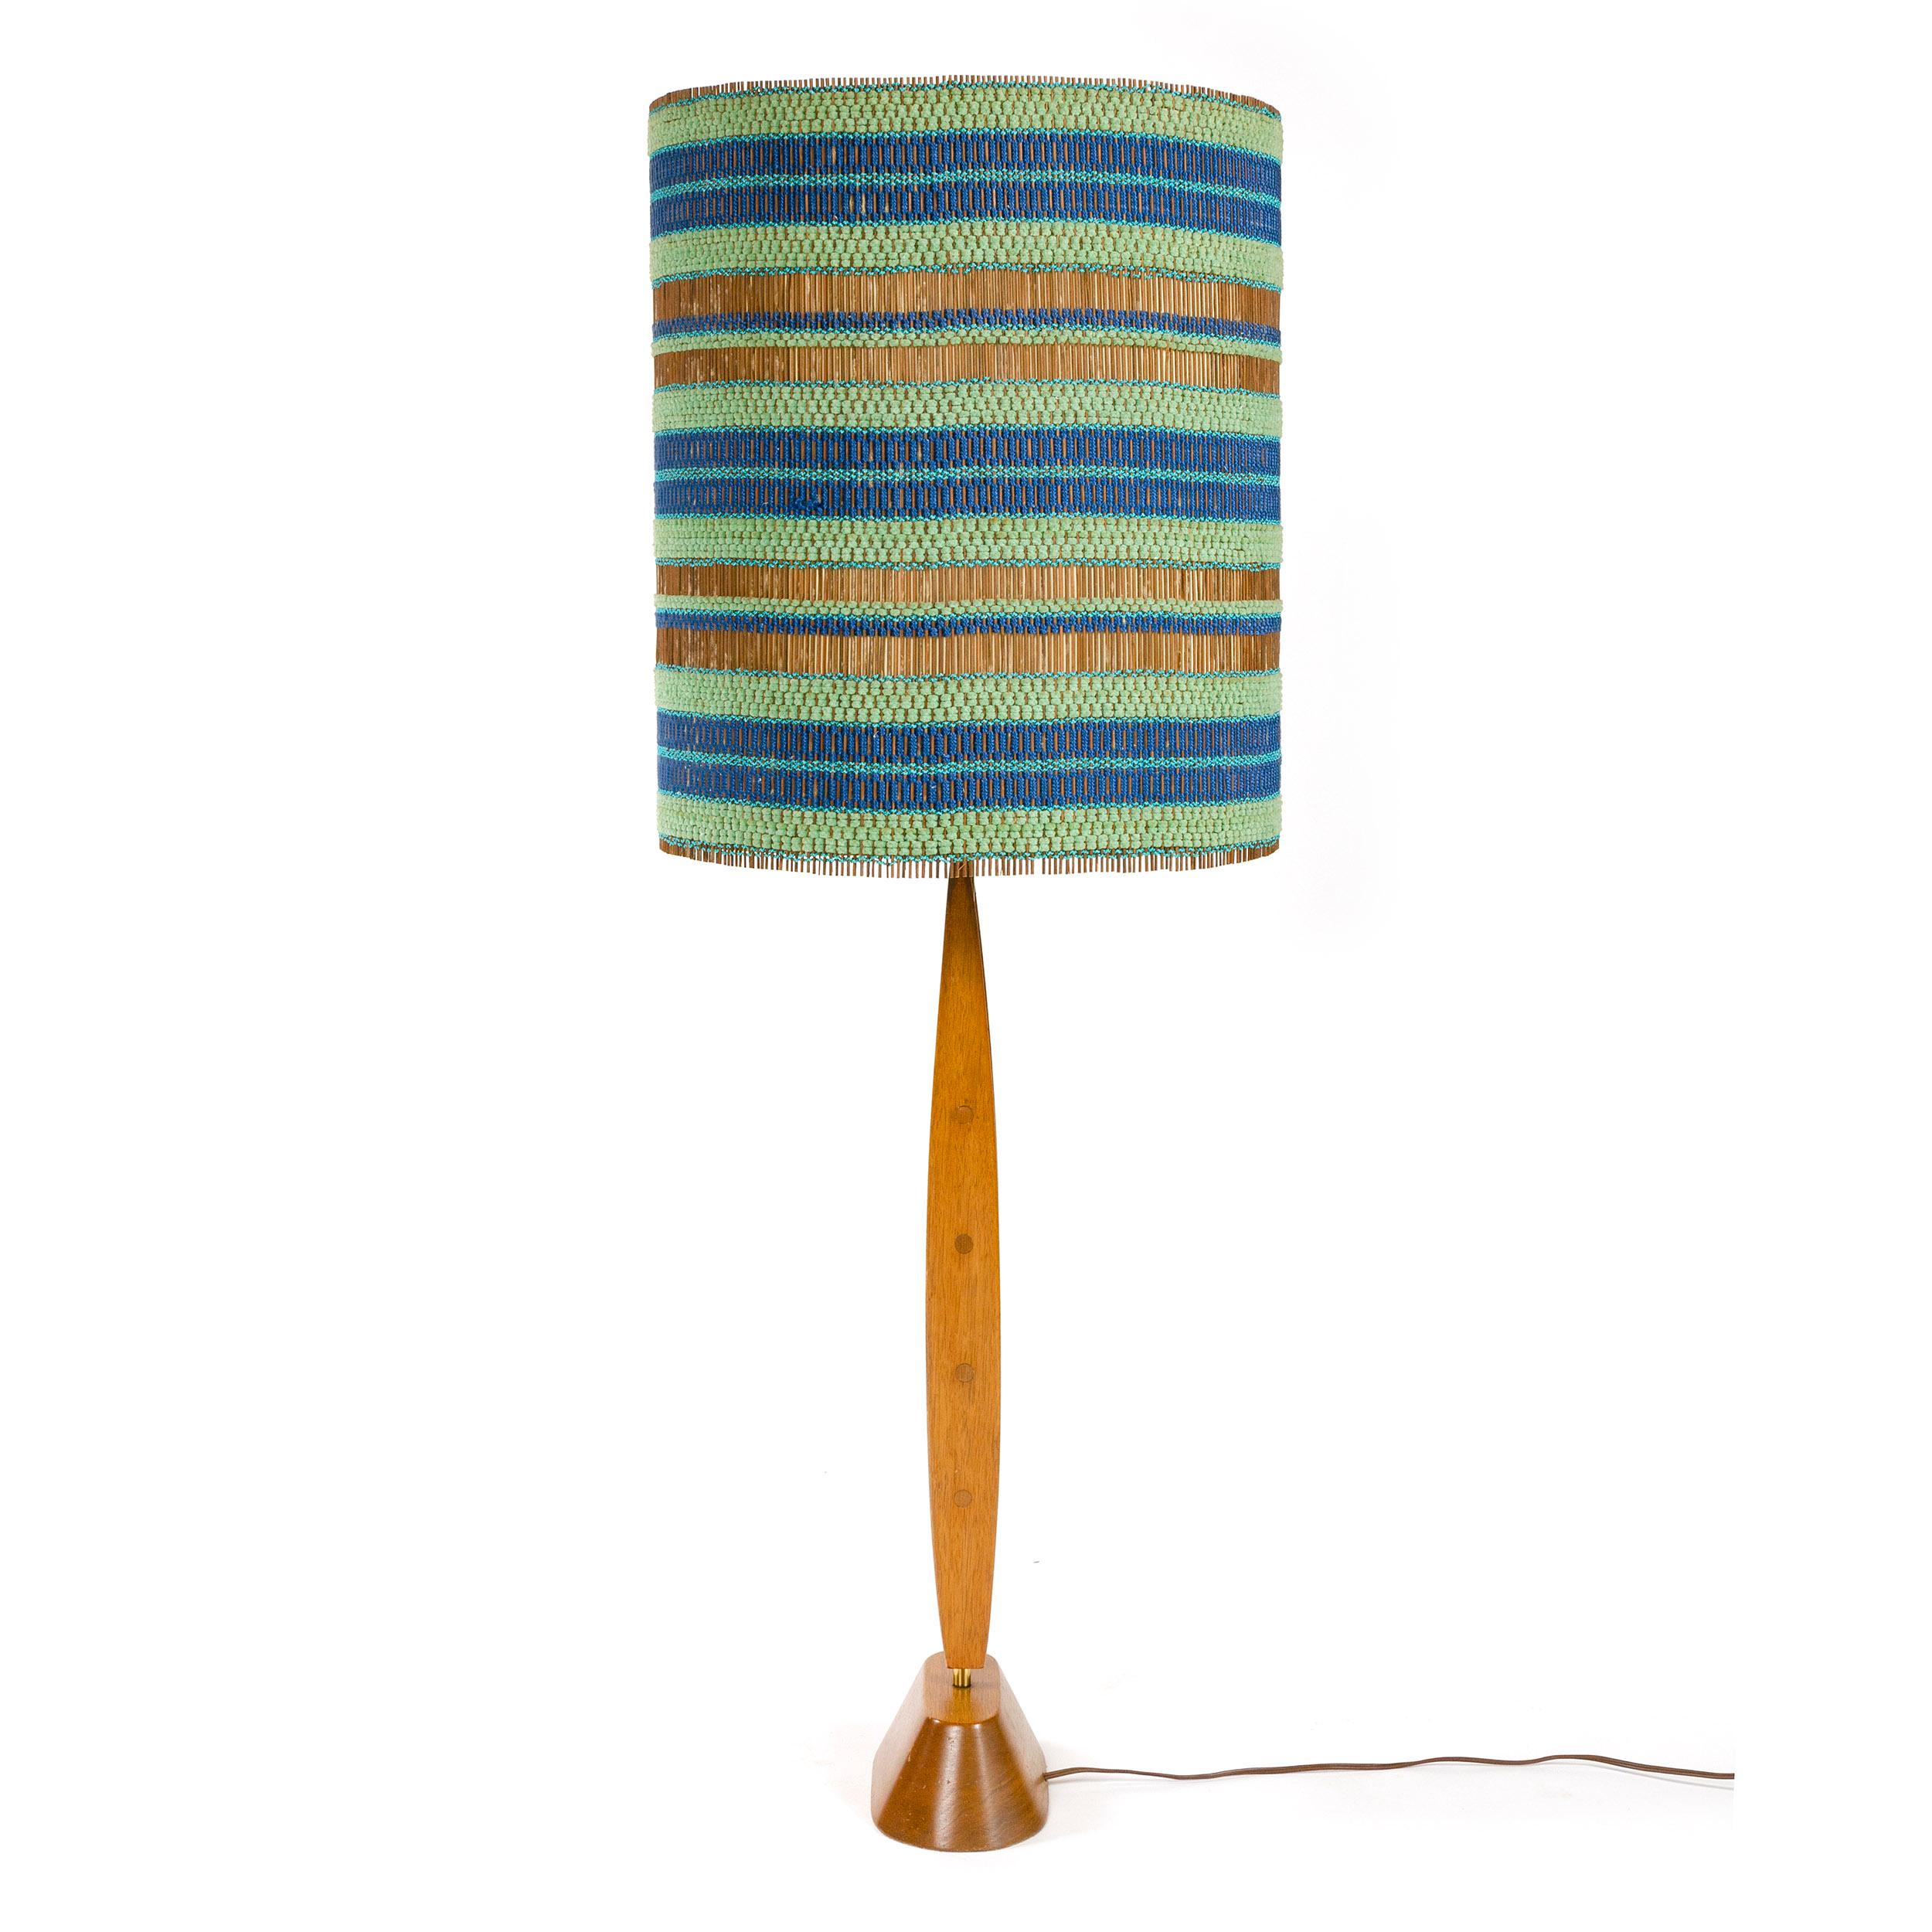 A mahogany and brass table lamp with decorative stone tiles paired with a matchstick chenille shade, woven with blue and turquoise threads.